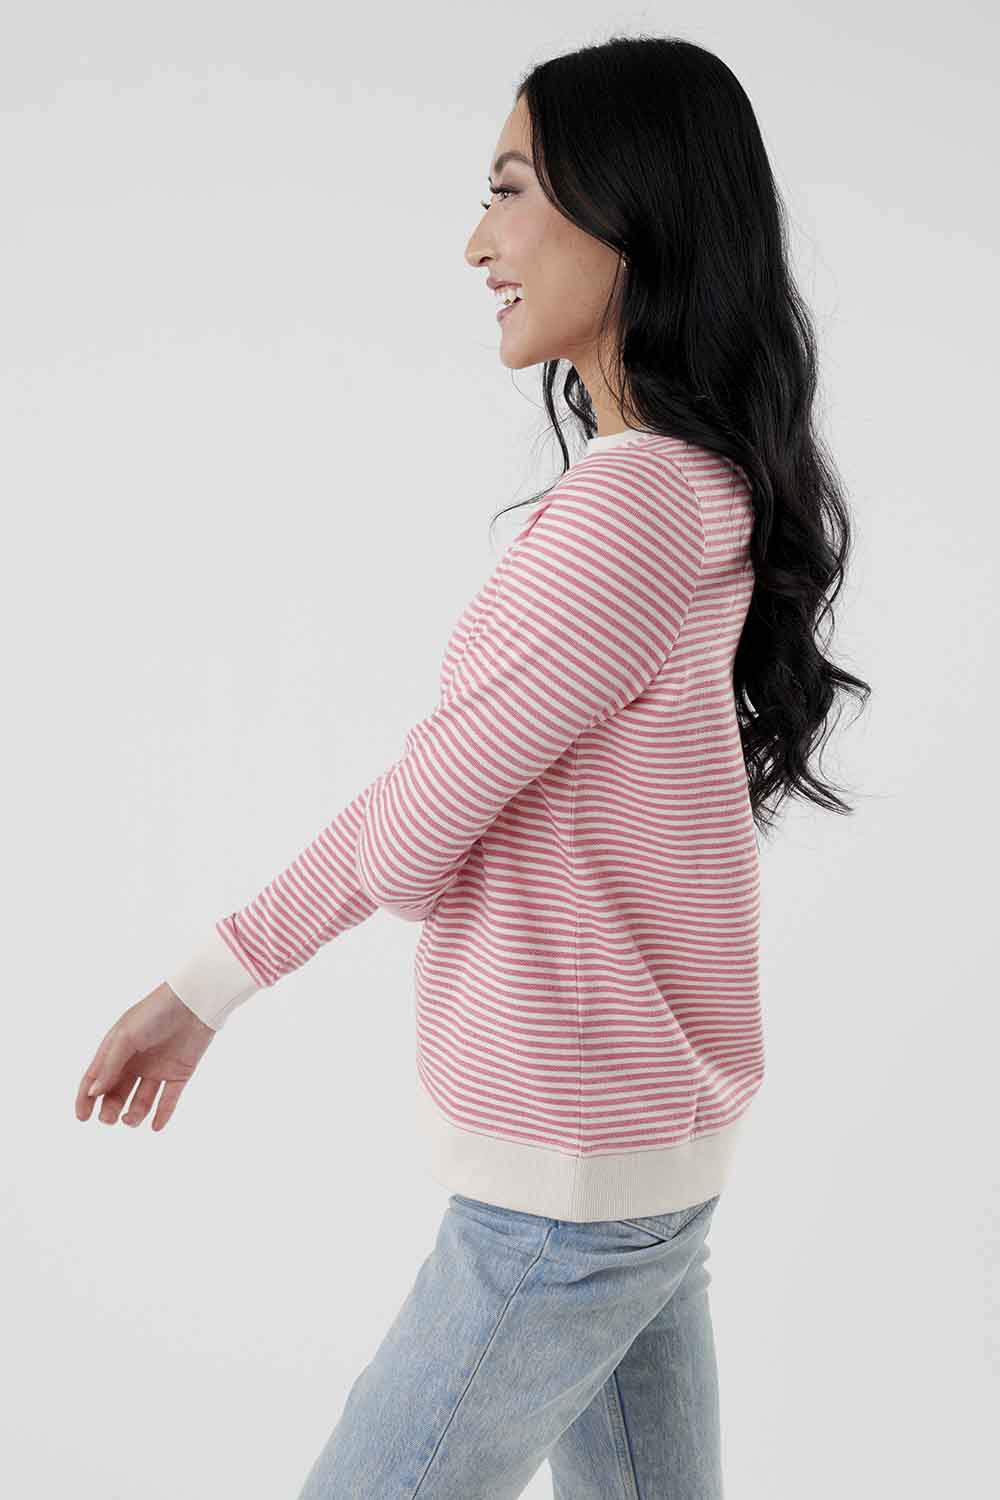 Autumn Stripes Pink Pullover Sweater Top